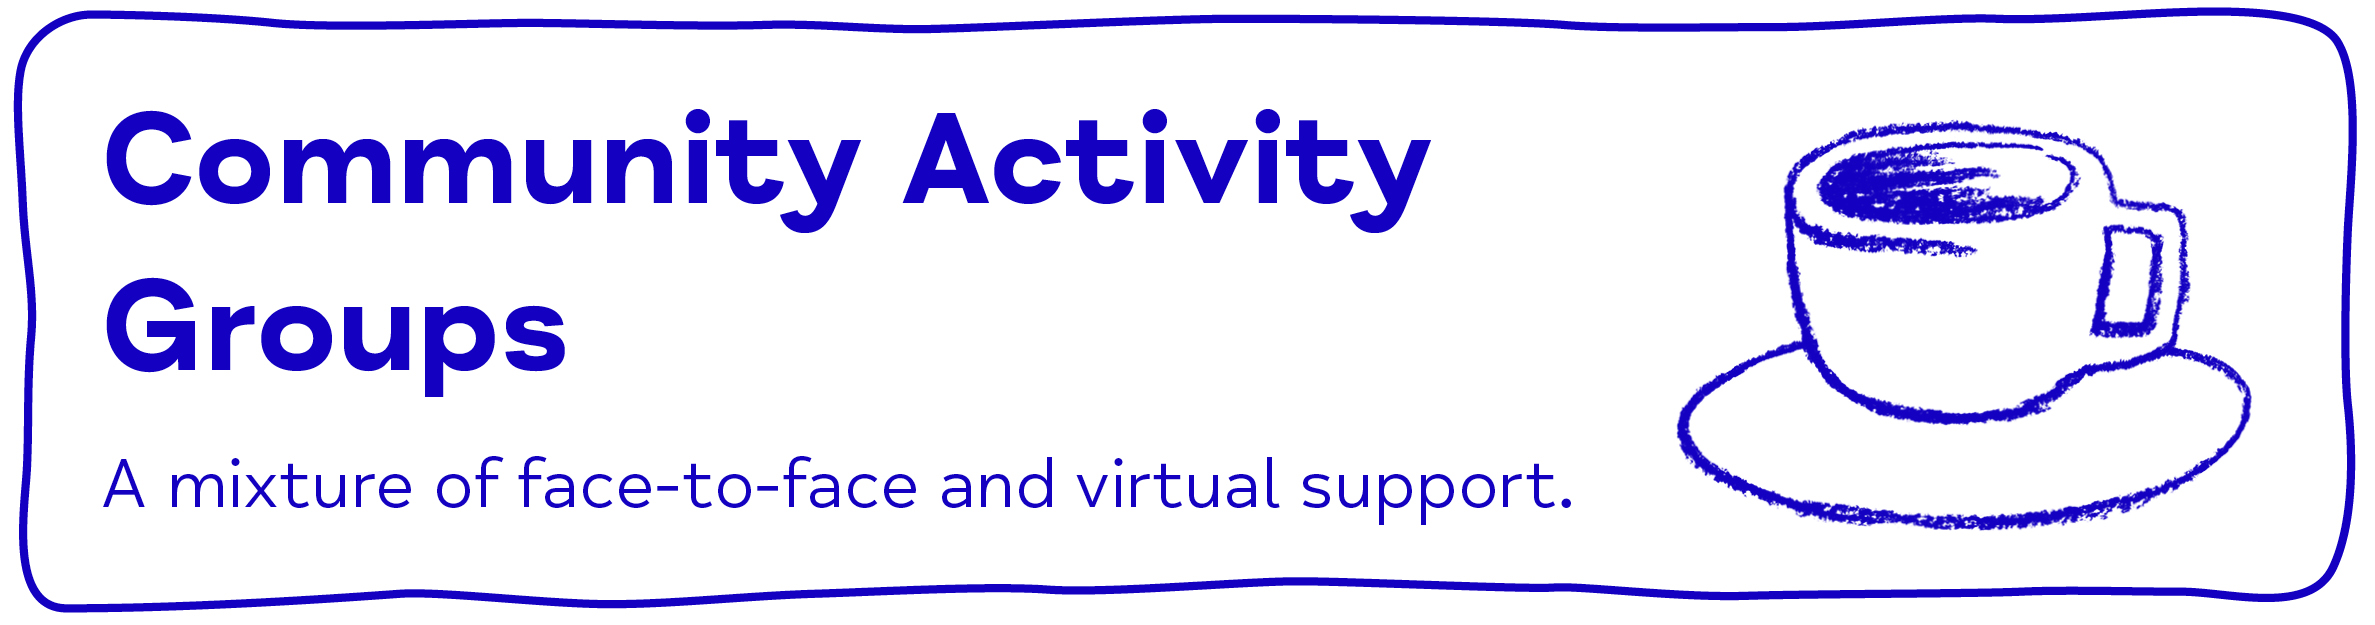 Community Activity Groups A mixture of face-to-face and virtual support.